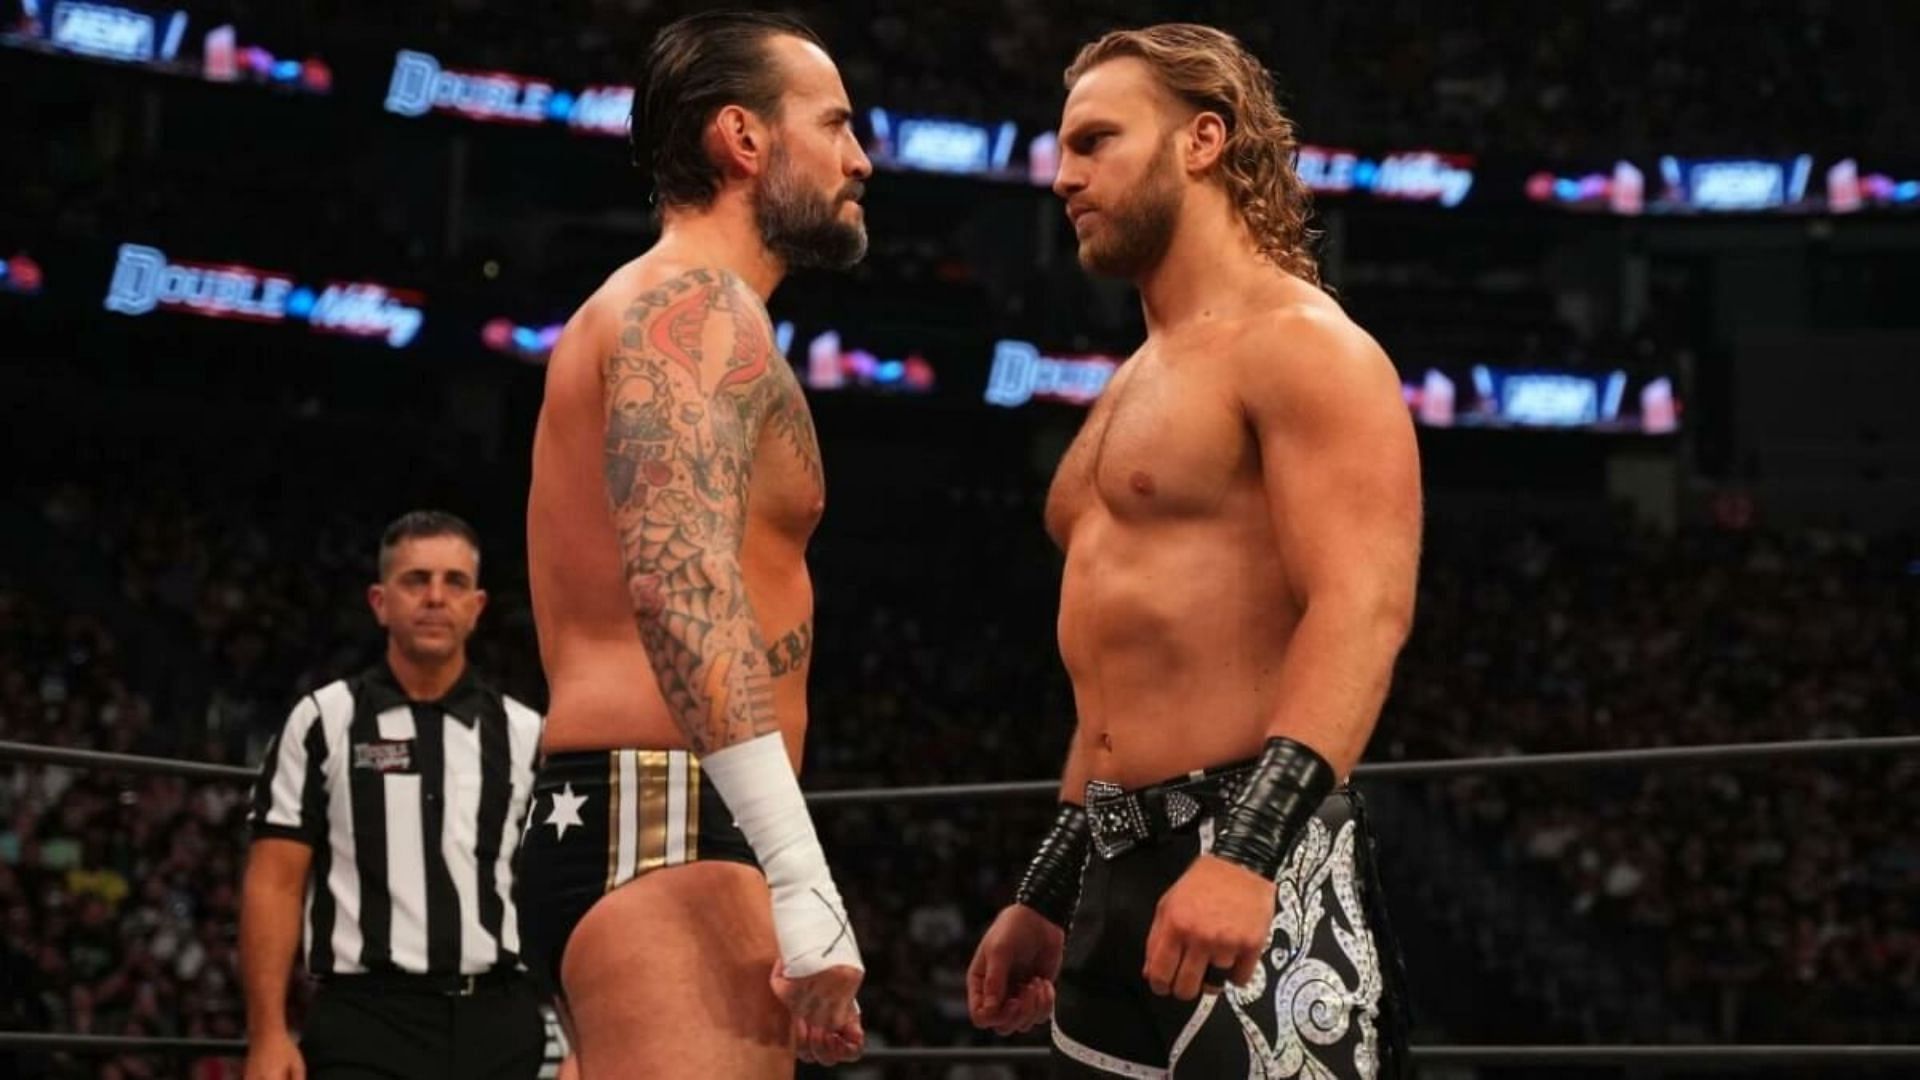 CM Punk and Hangman faced each other at Double or Nothing